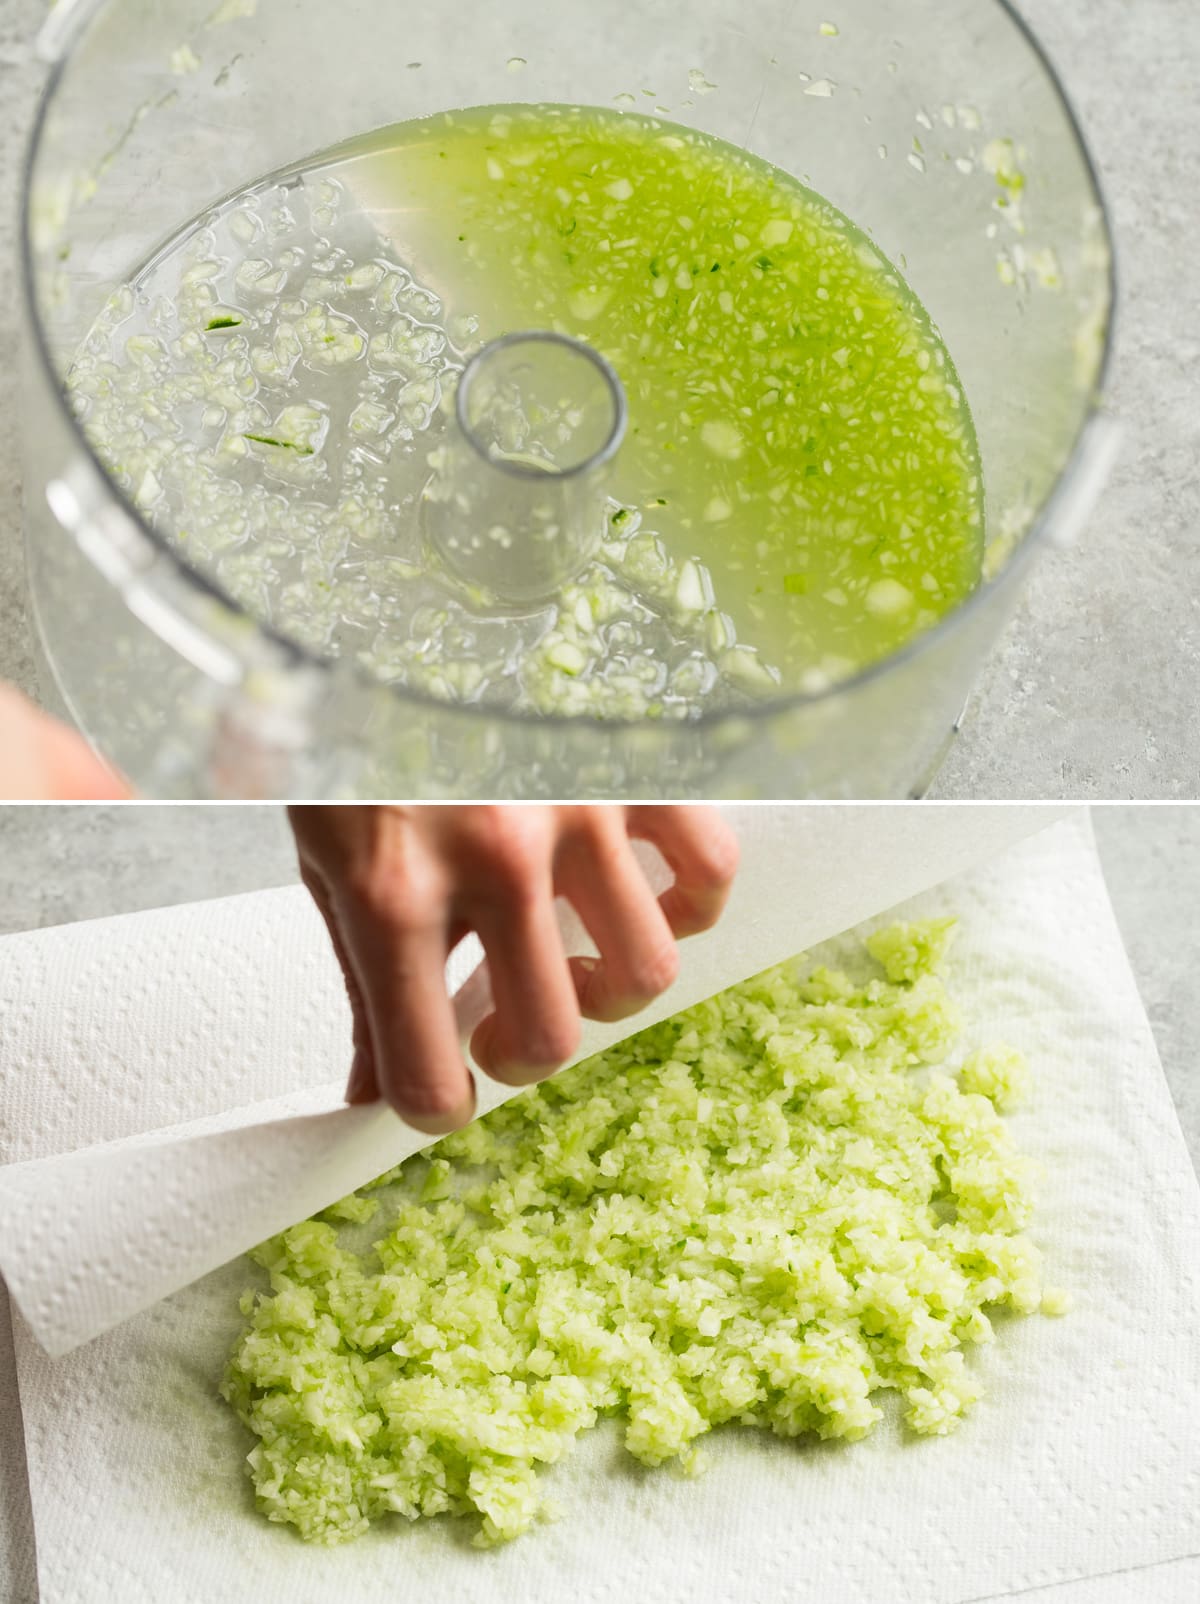 Image showing cucumber juice to leave behind in food processor, and straining cucumbers to remove liquid on paper towels.